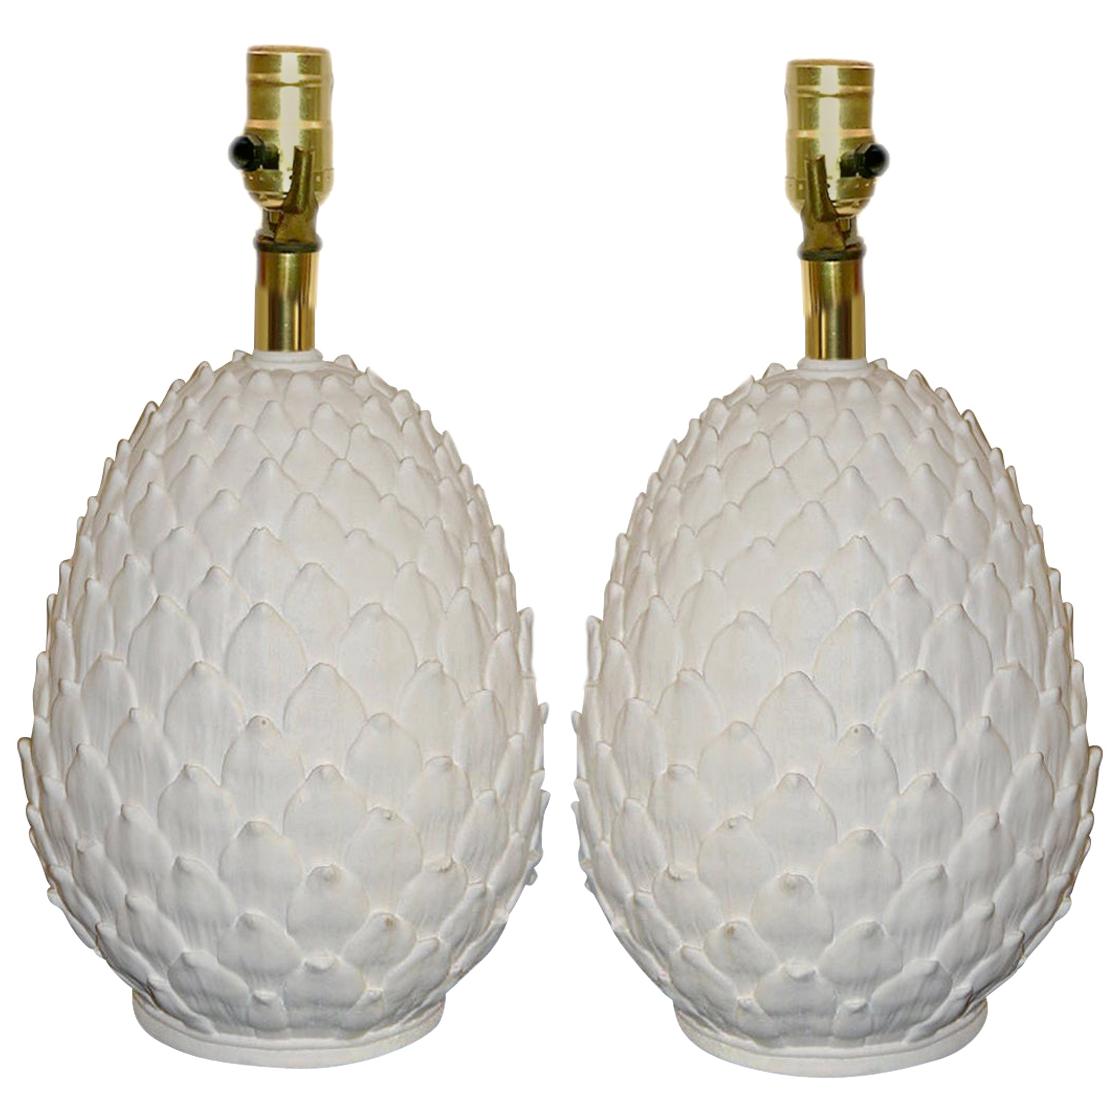 Pair of Porcelain "Pineapple" Table Lamps